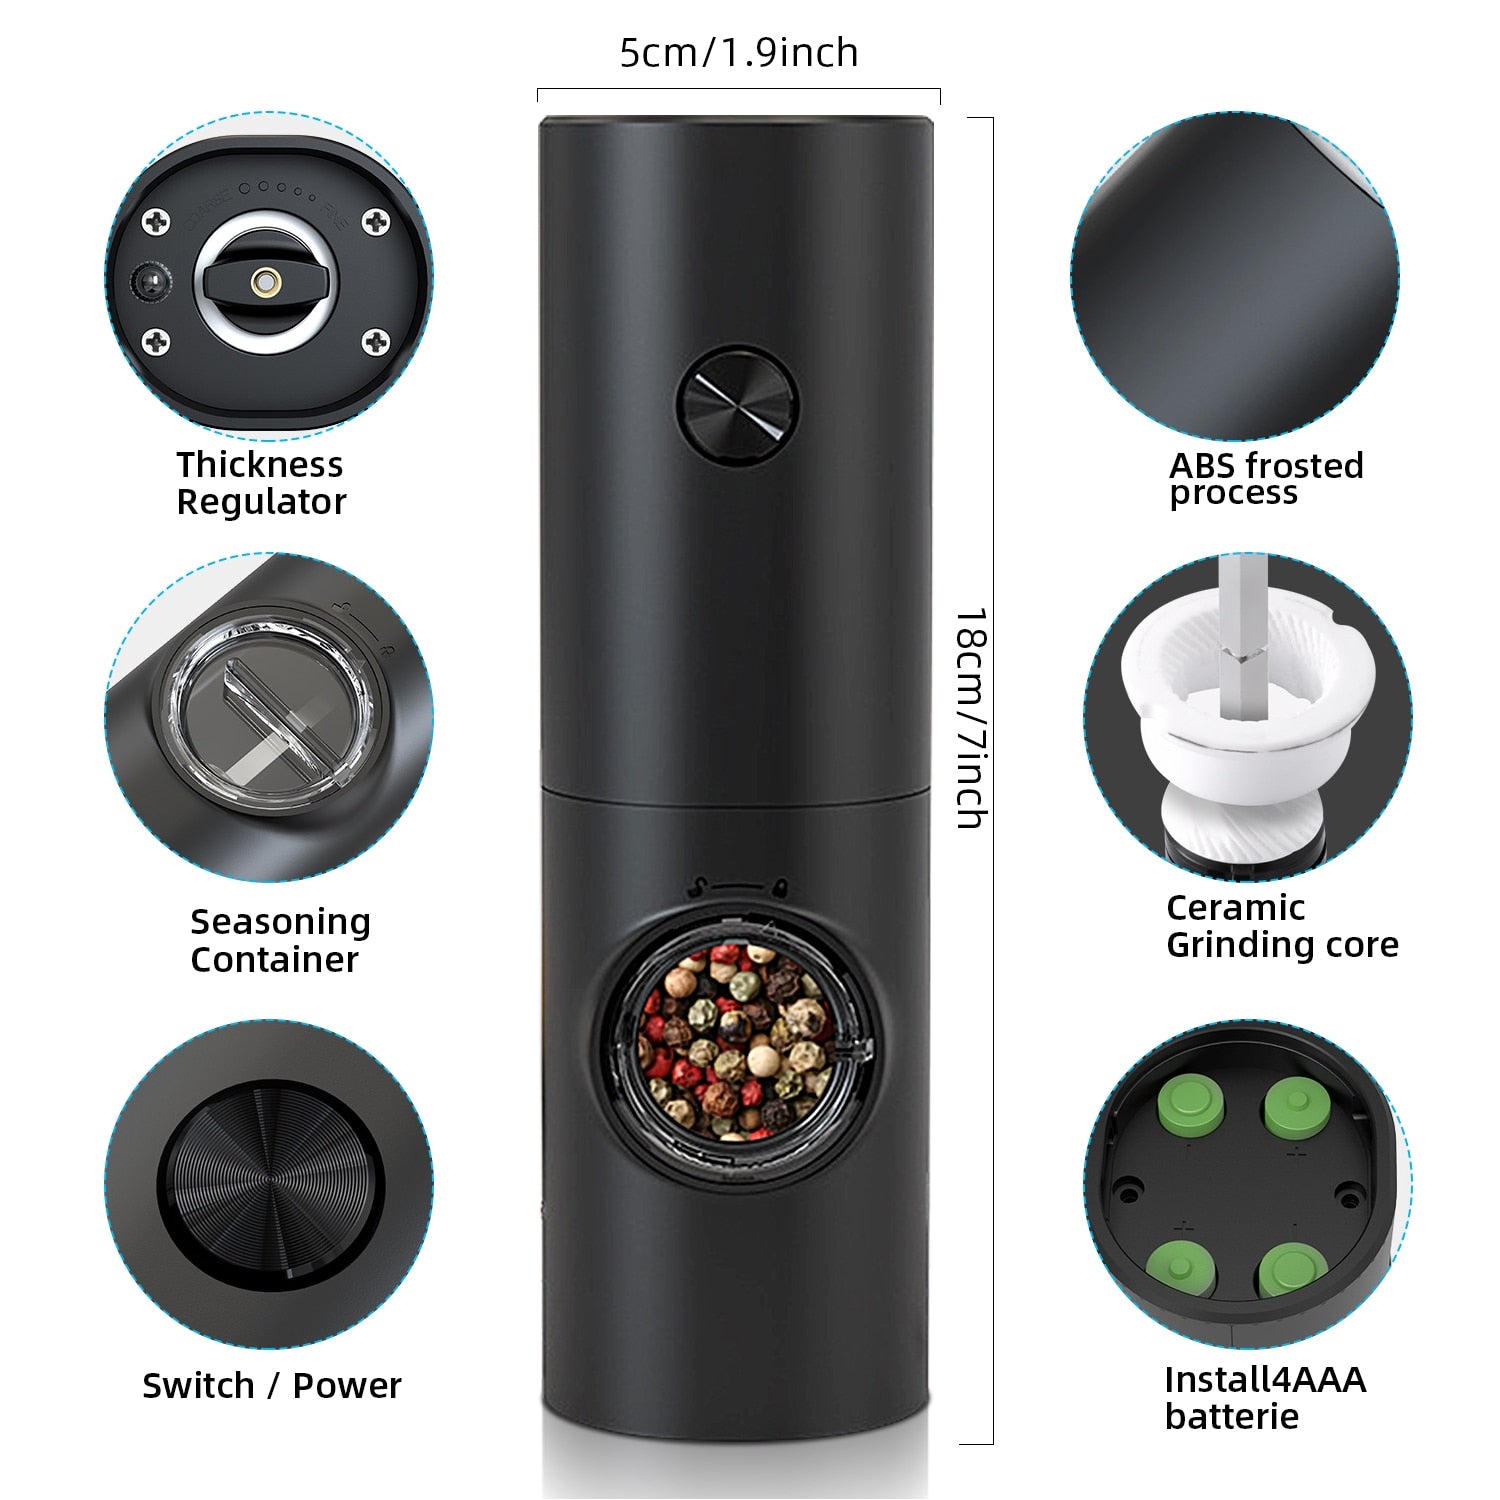 Electric Automatic Mill Pepper And Salt Grinder With LED Light Adjustable Coarseness Produced By Xiaomi Partner Manufacturers